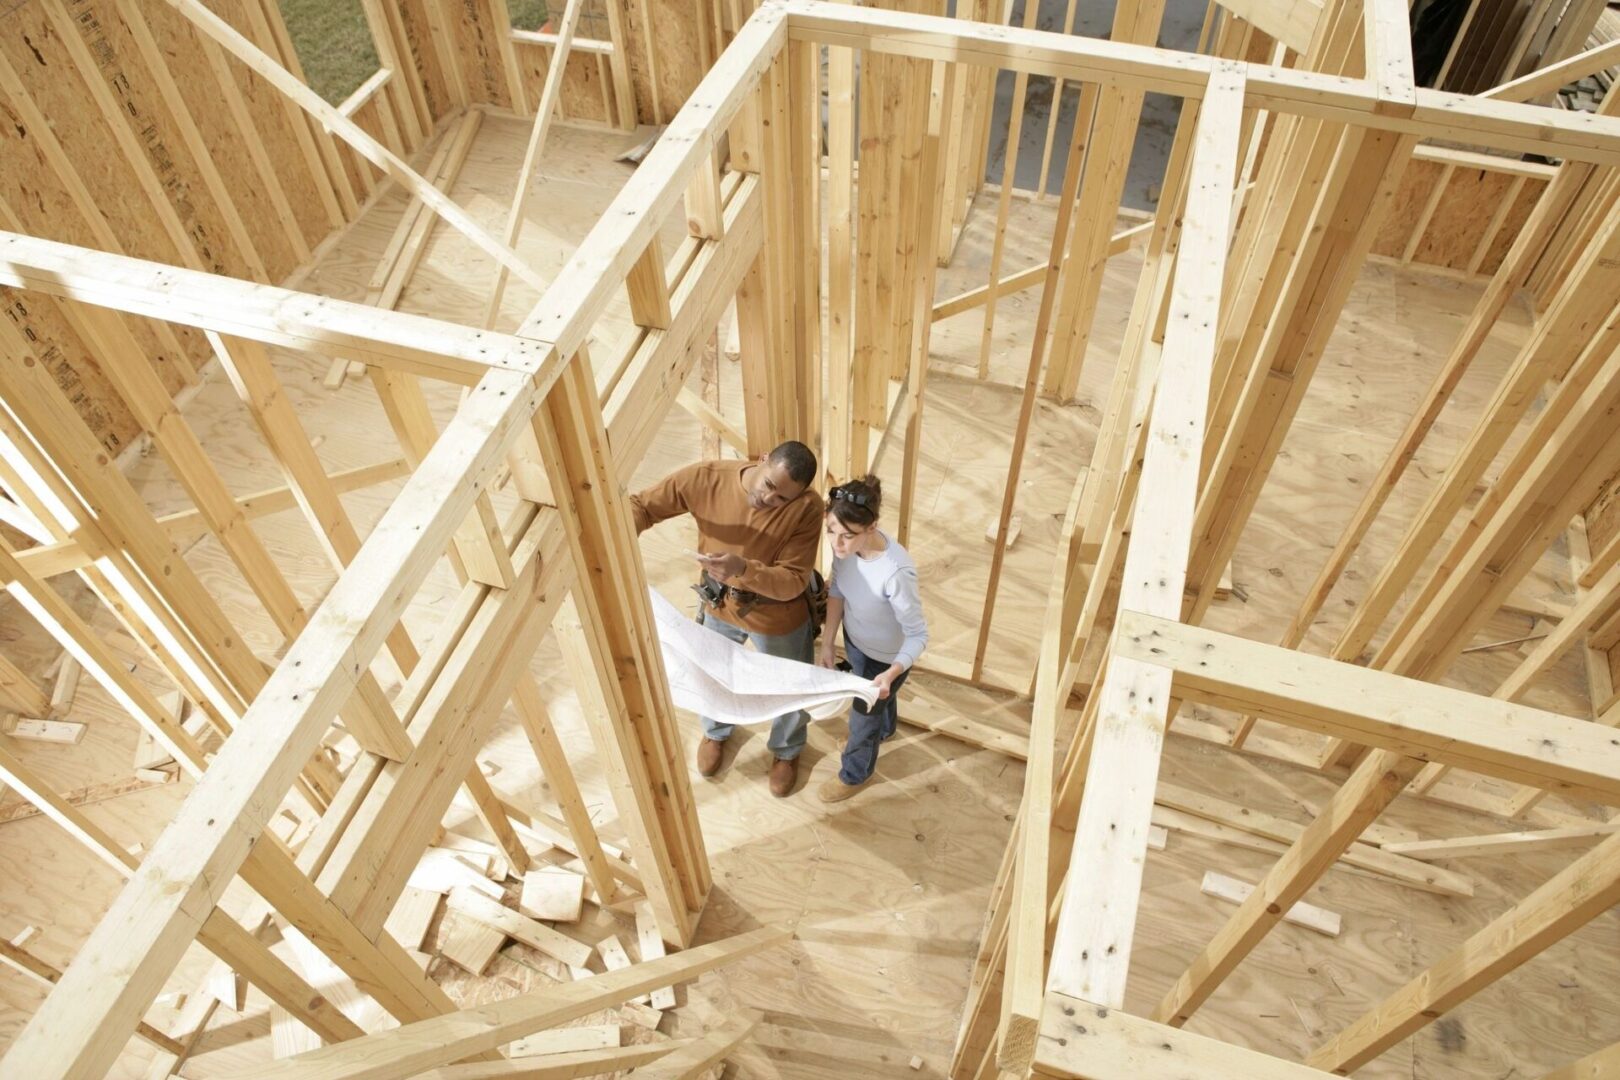 Two persons inside, a house being built